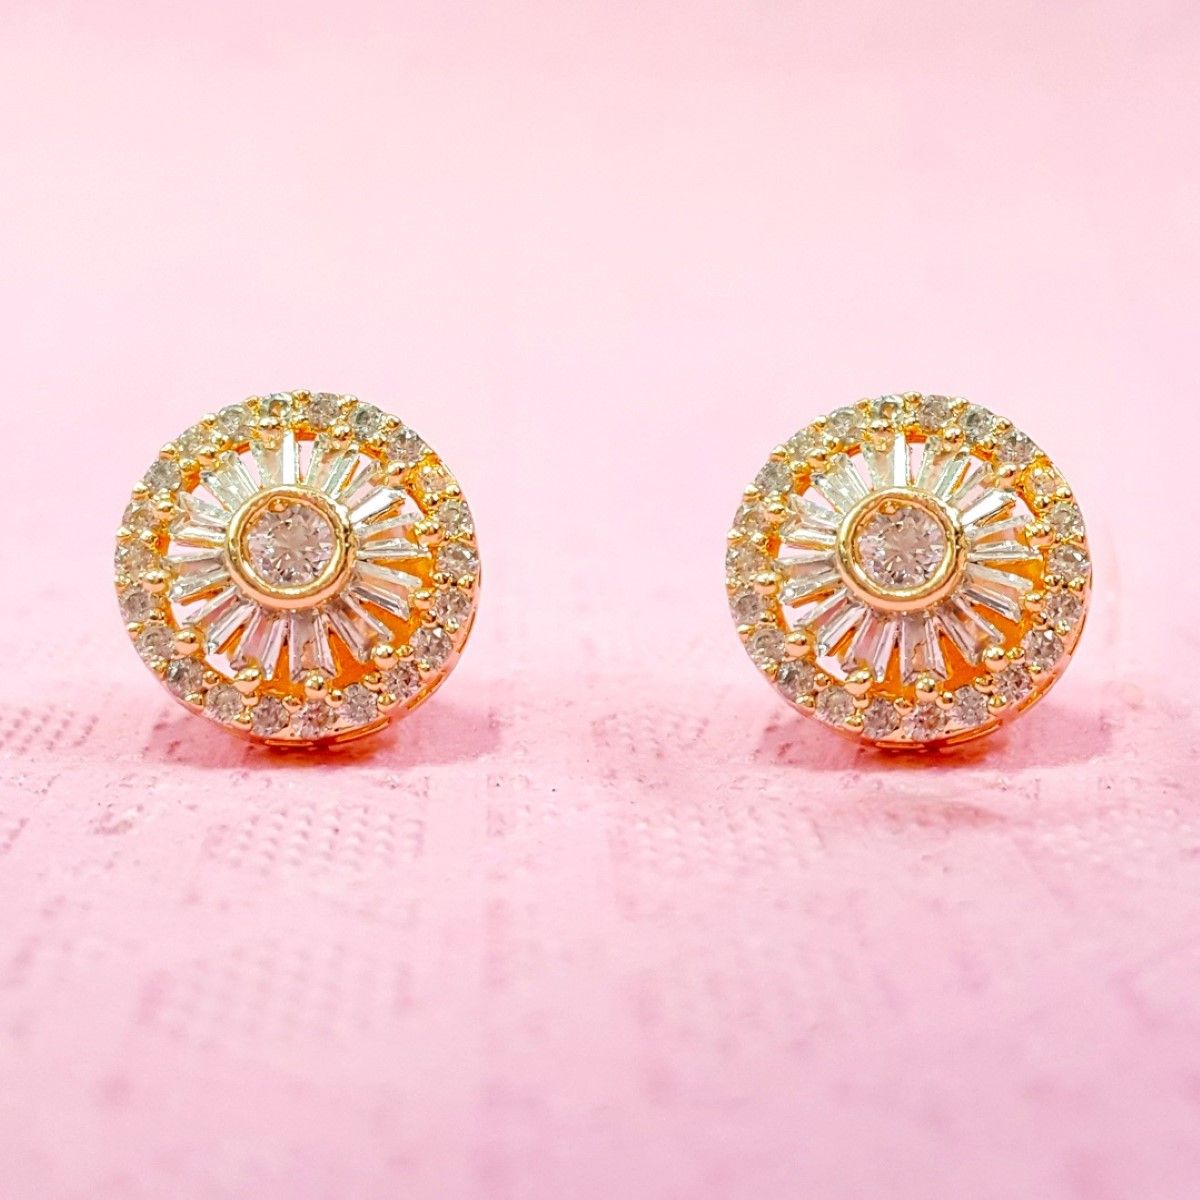 Cute Gold Polish Diamond Stud Earrings By Much More